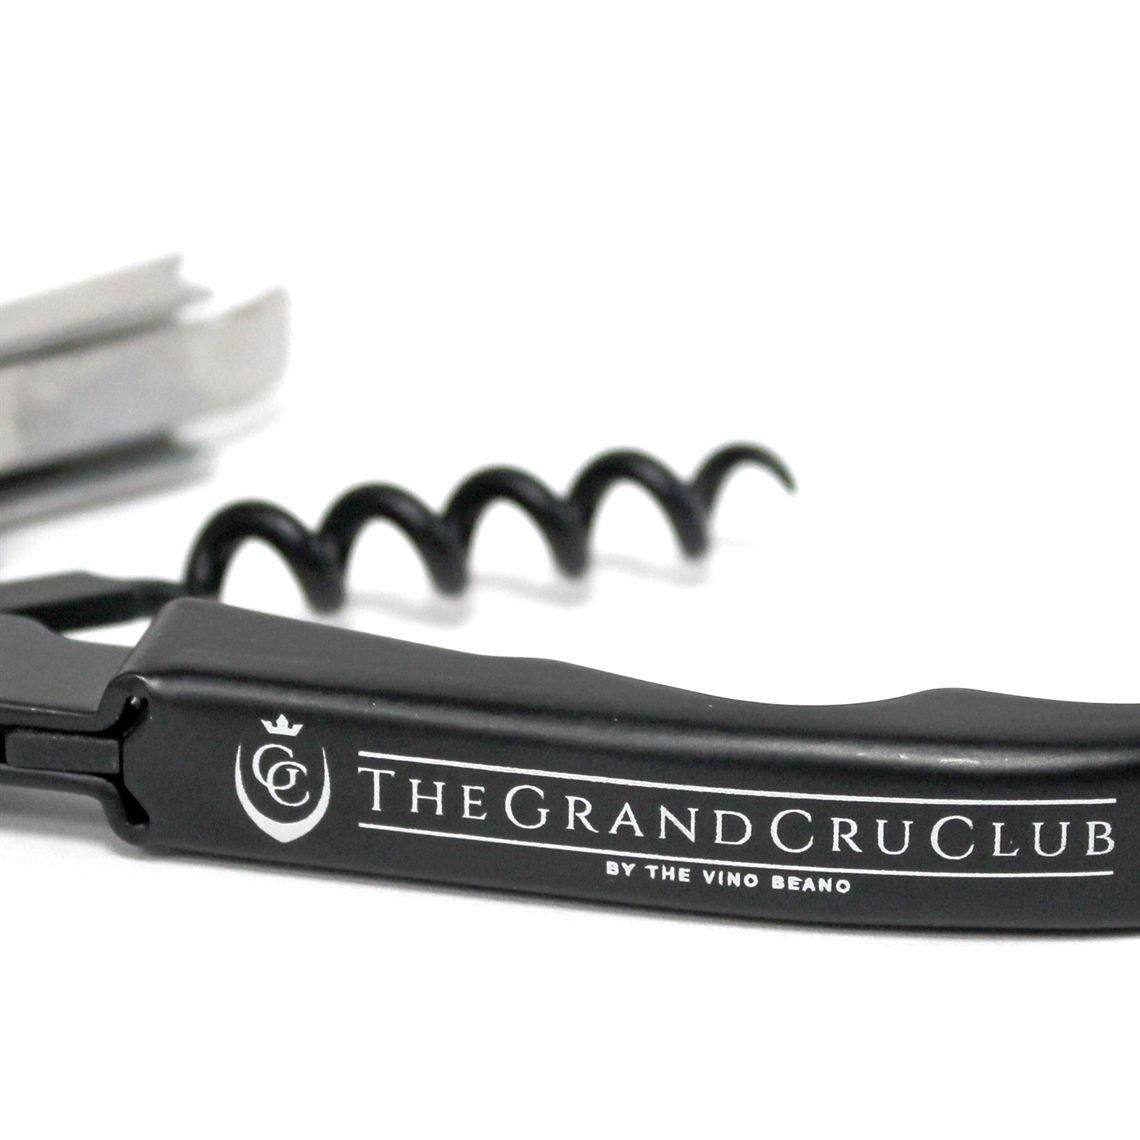 View more vacu vin from our Branded Corkscrews & Bottle Openers range